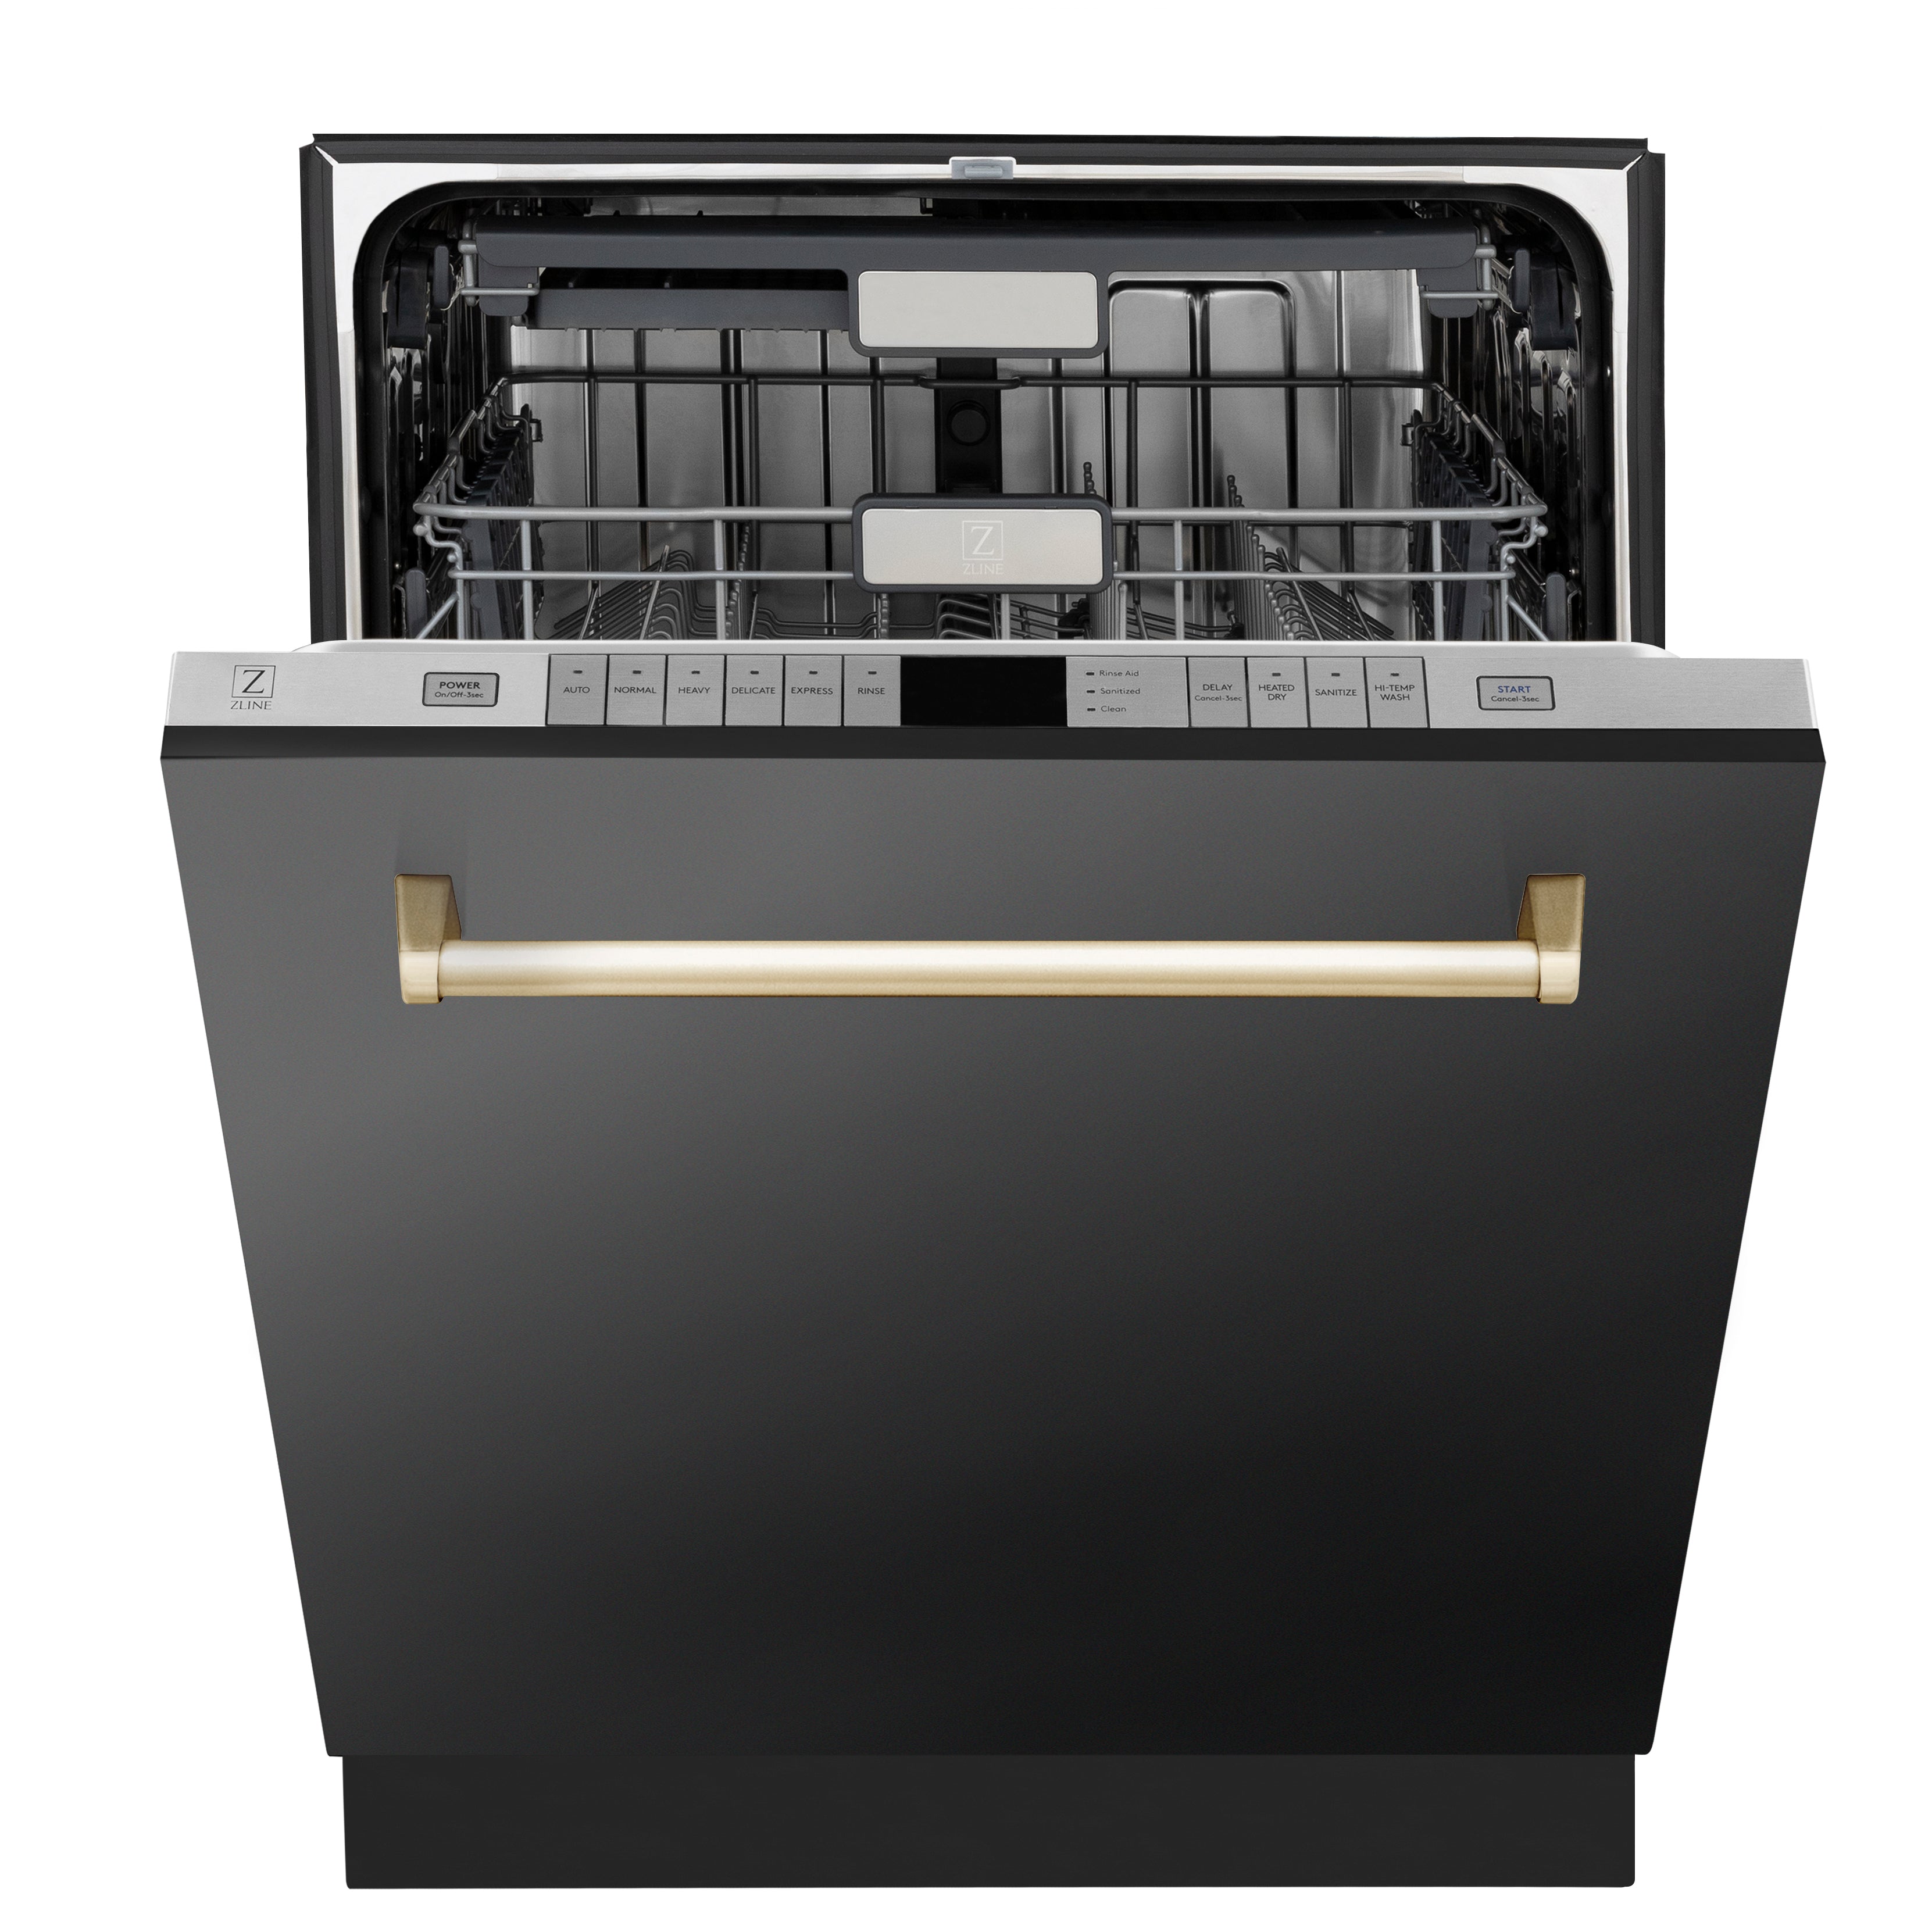 ZLINE Autograph Edition 24" 3rd Rack Top Touch Control Tall Tub Dishwasher in Black Stainless Steel with Gold Handle, 45dBa (DWMTZ-BS-24-G)